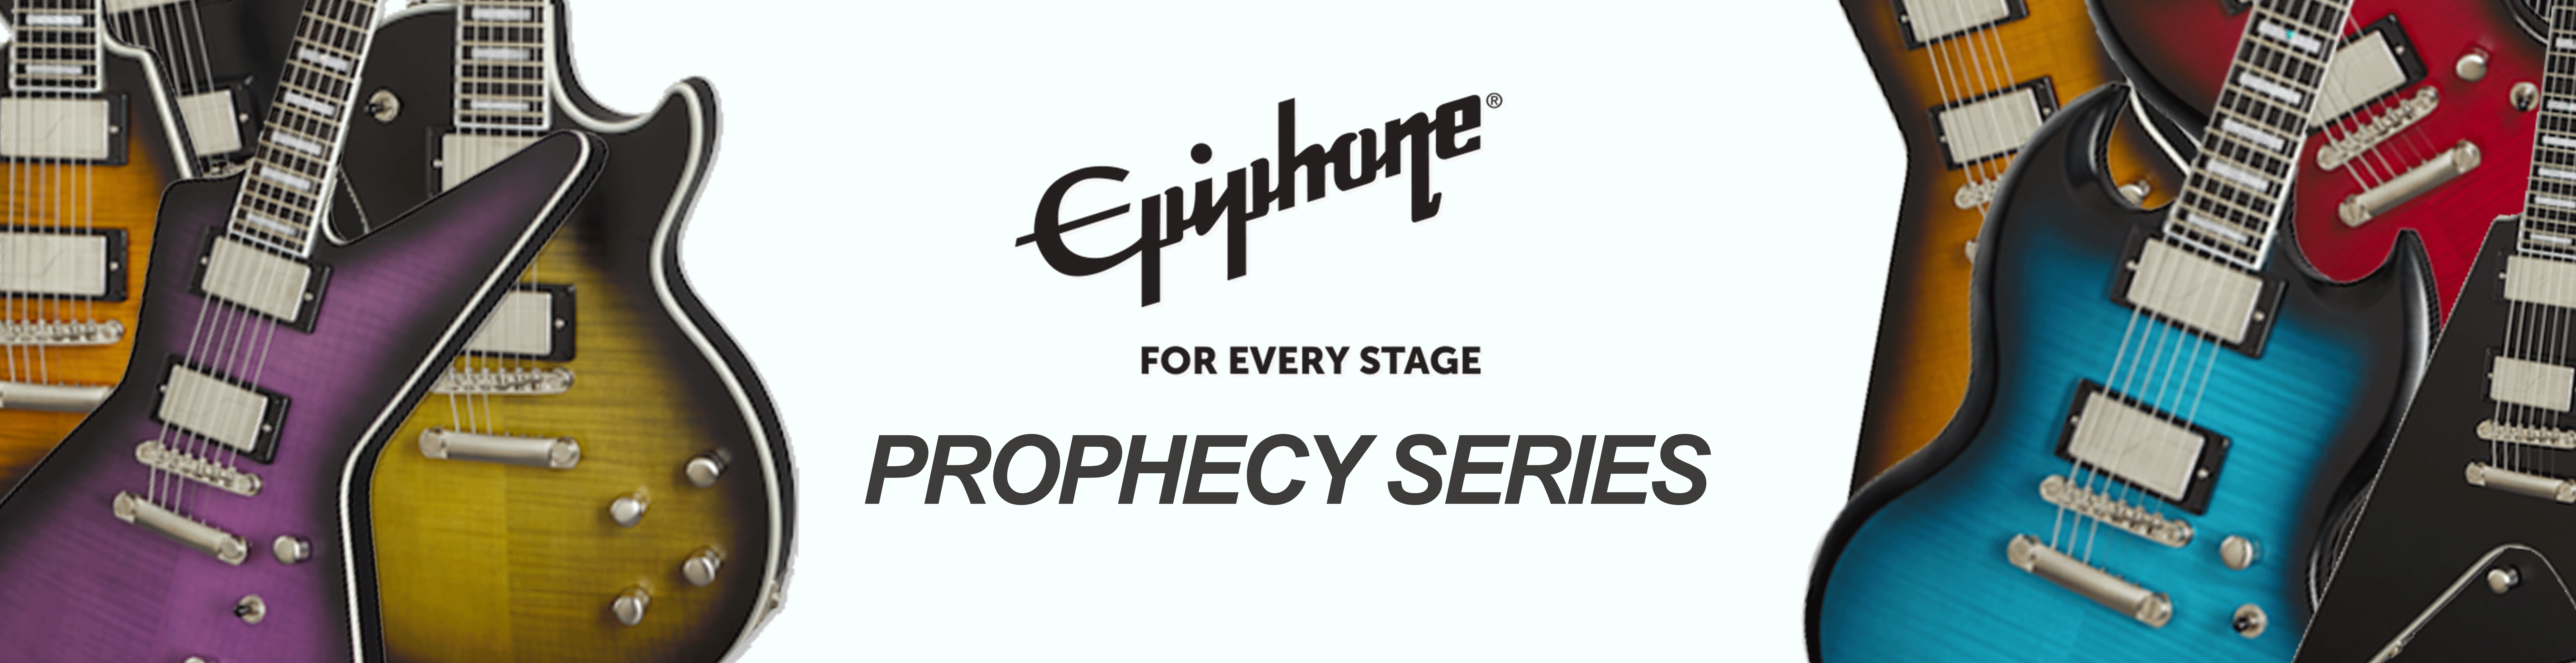 Epiphone Prophecy Series